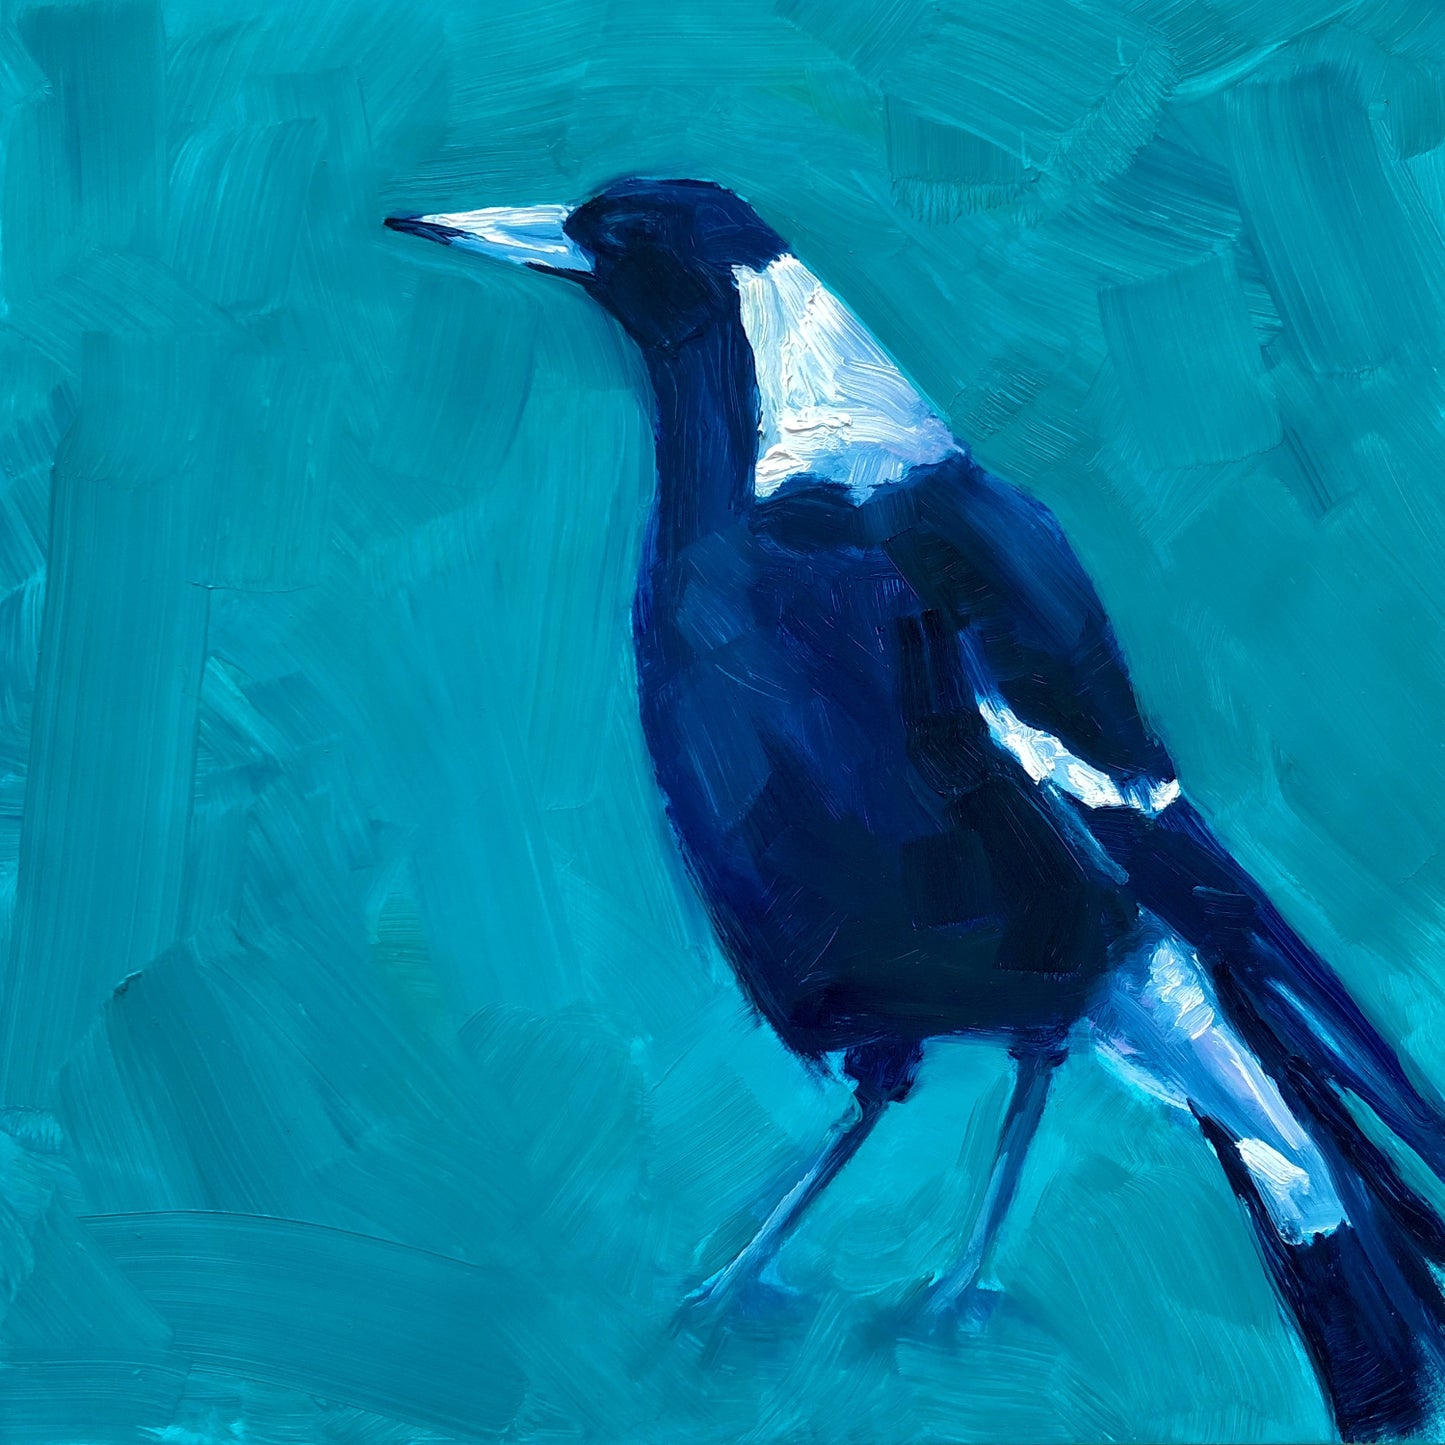 photo of an original oil painting on board of a navy blue and white magpie on a textured turquoise background